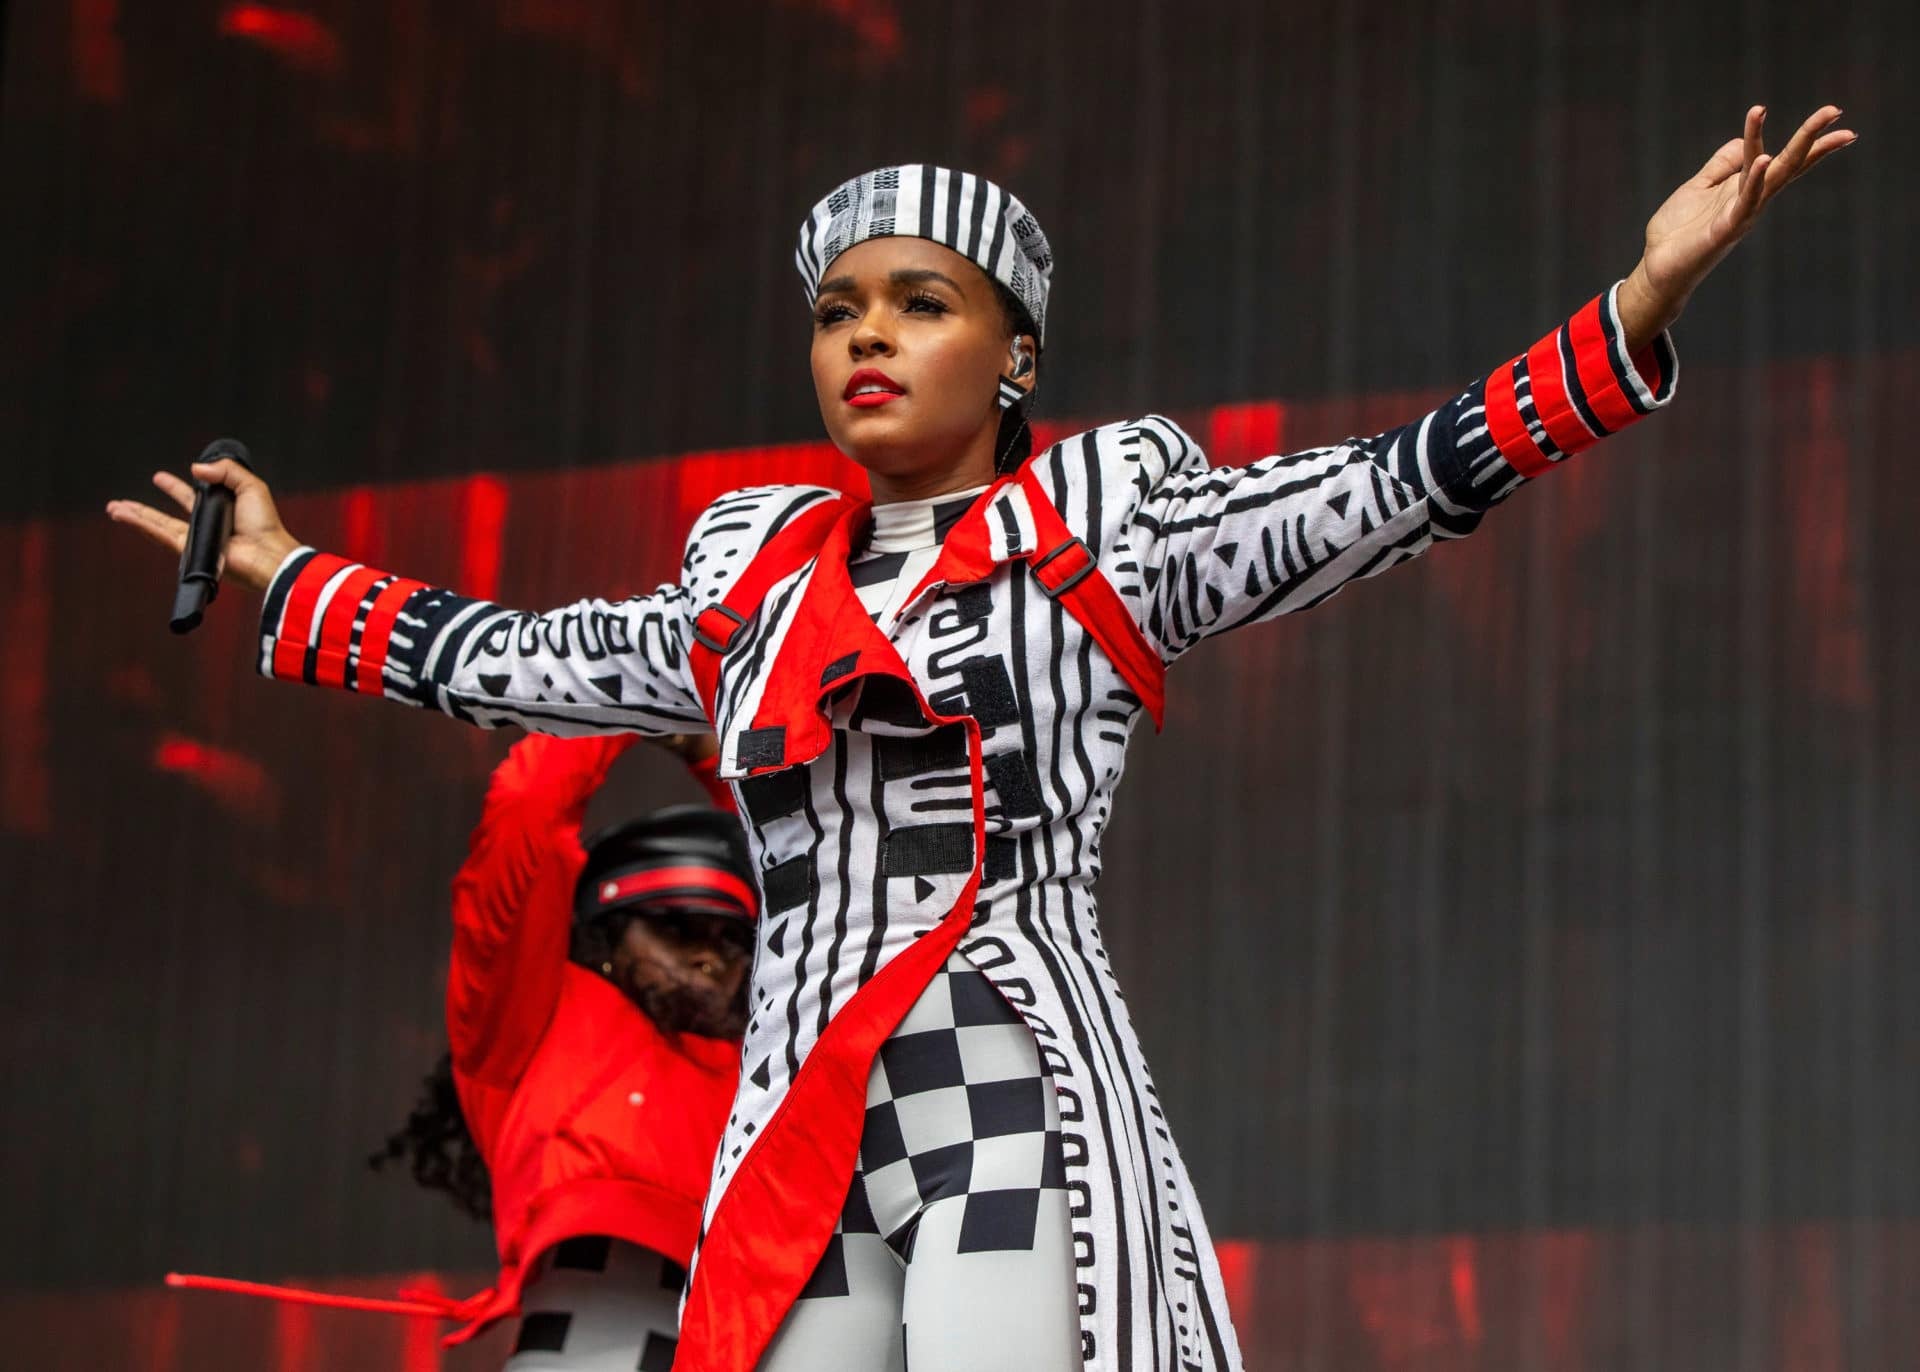 A Friendly Reminder From Janelle Monáe That Women Have Agency Over Our Own Bodies